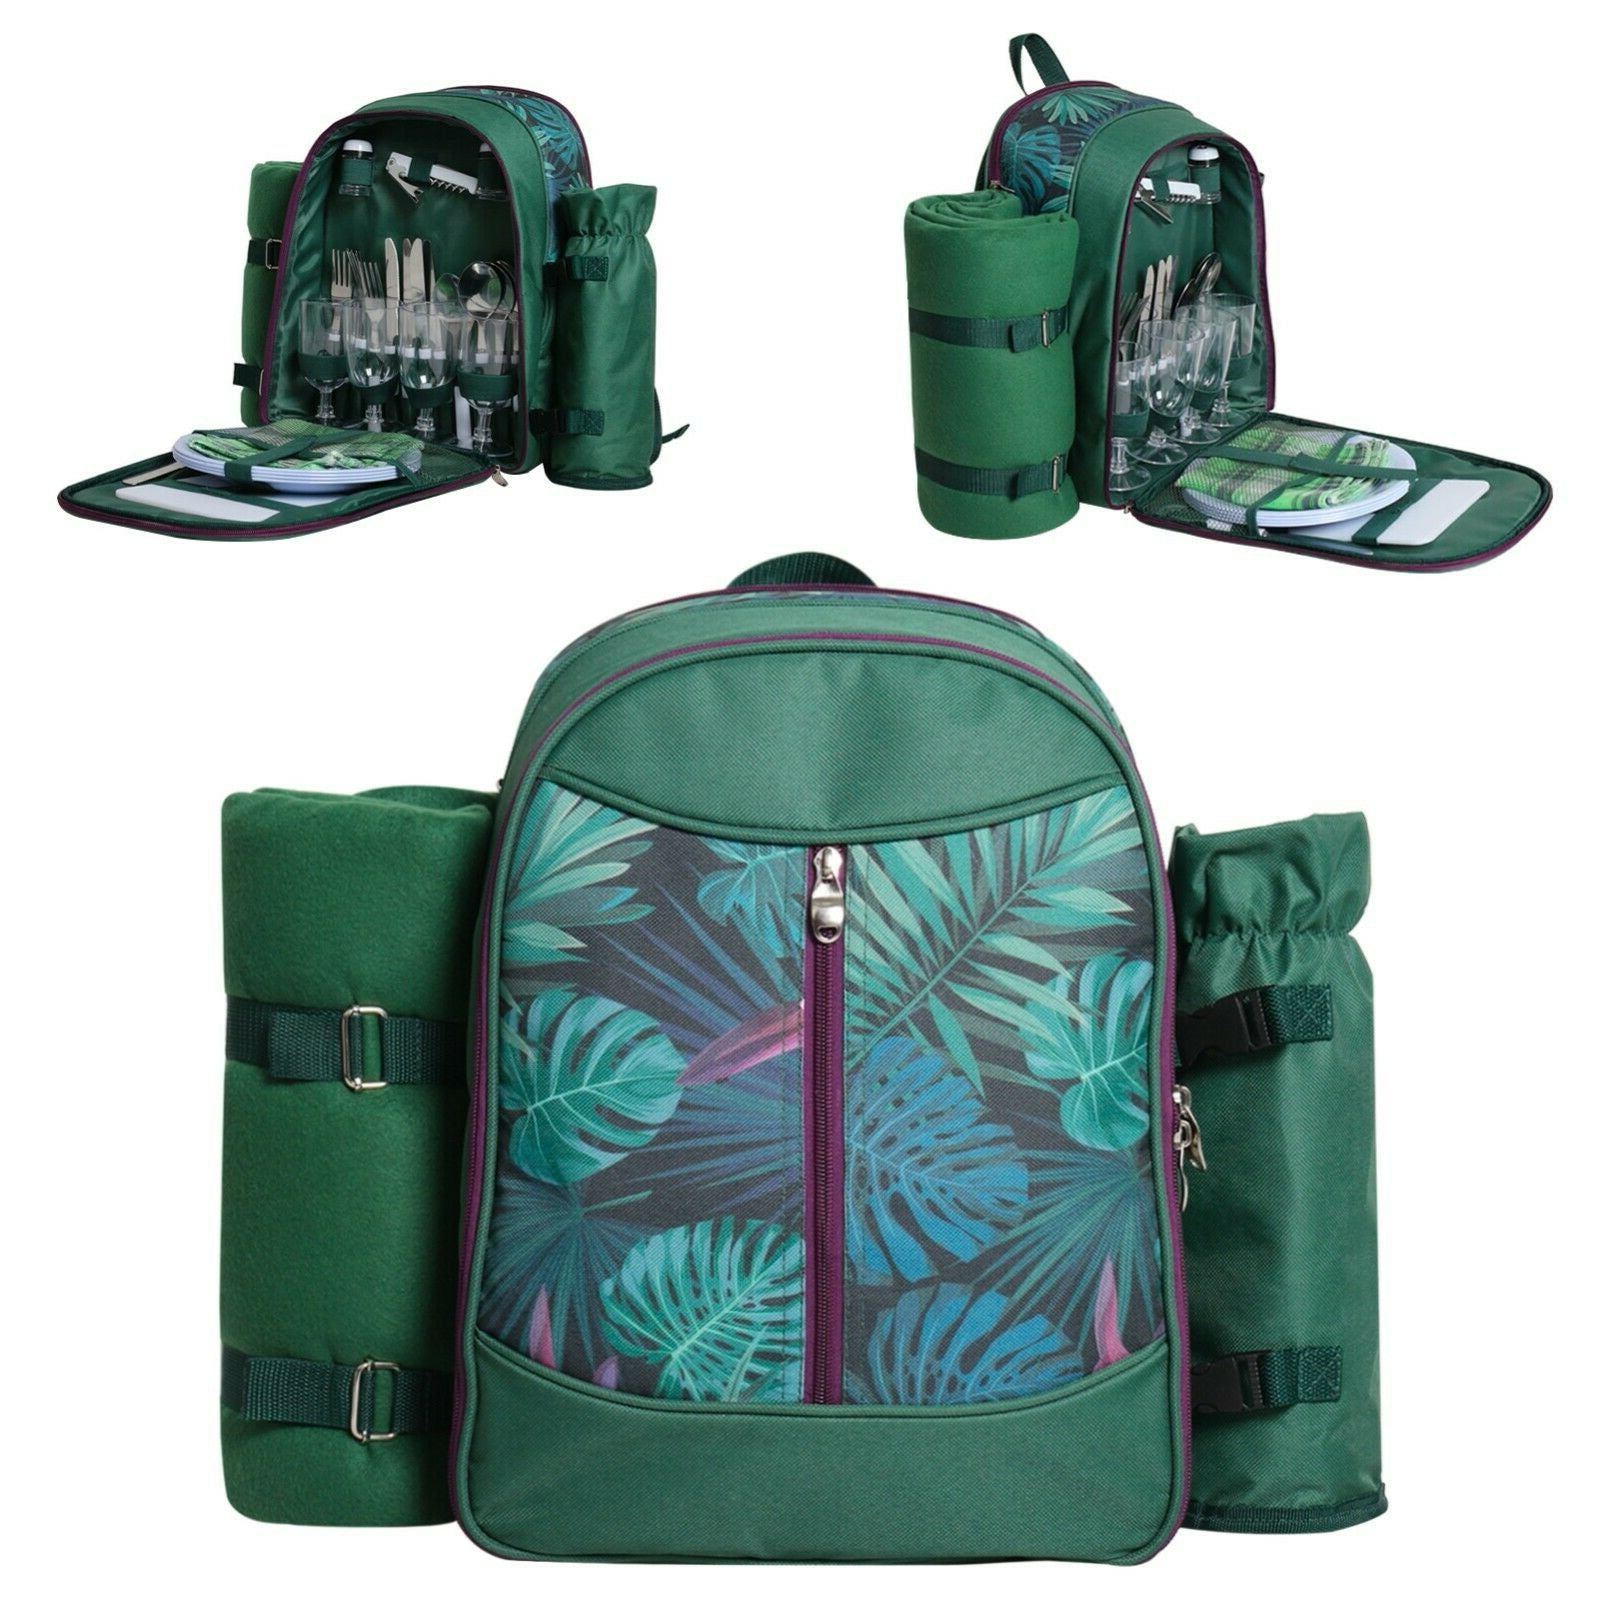 Picnic Backpack Set With Cutlery Kit Cooler Compartment Blanket For 4 Persons - Eagles Domain Coffee